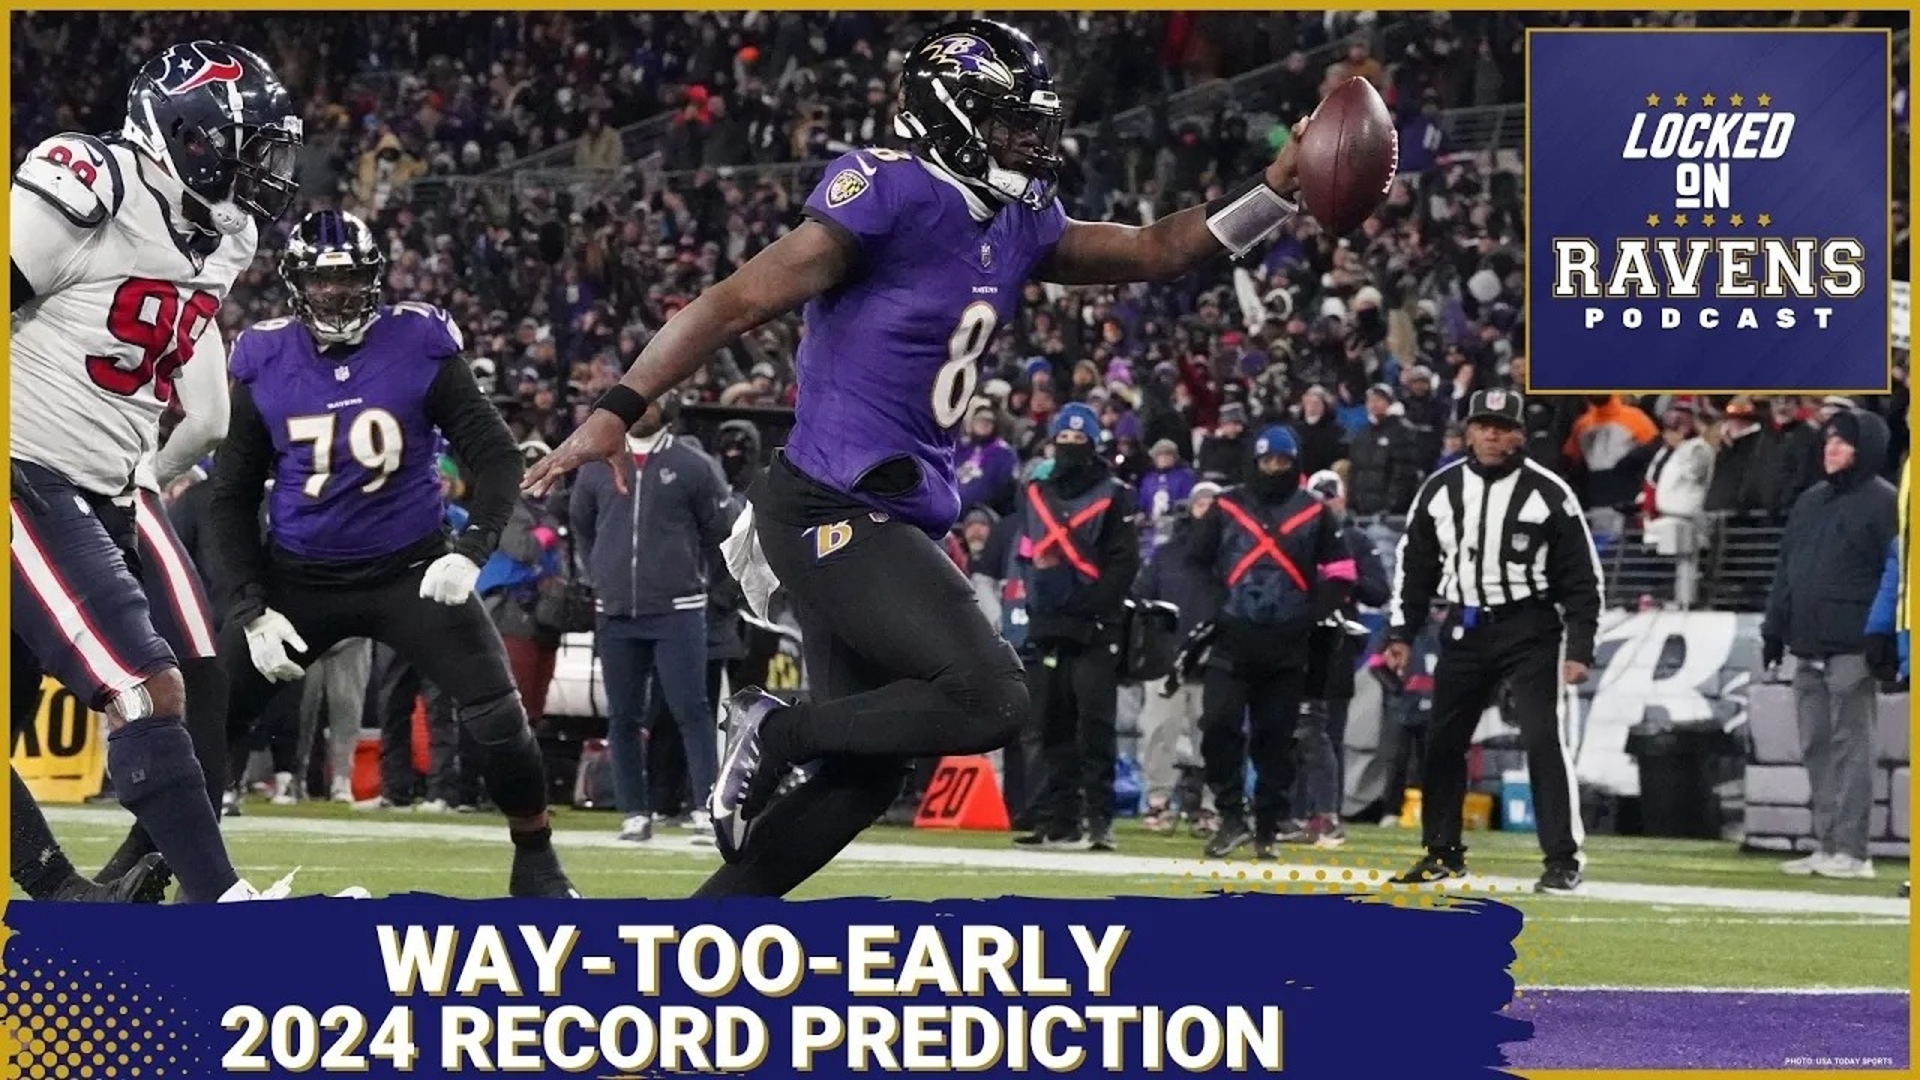 We look at a way-too-early Baltimore Ravens 2024 record prediction and game-by-game schedule projections, looking at the team's full schedule and more.